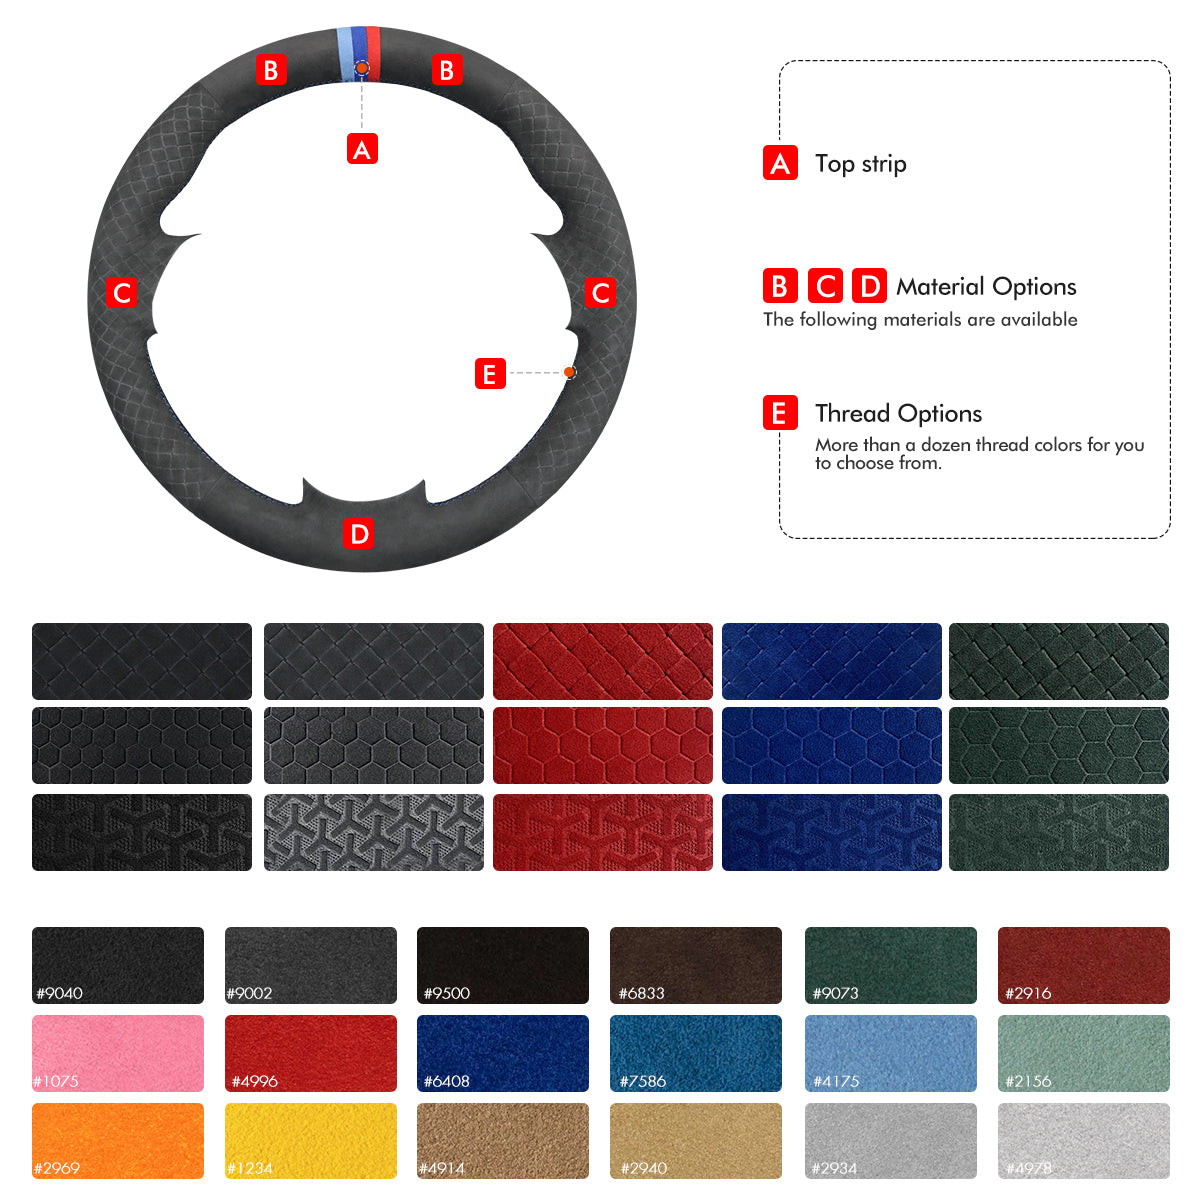 MEWANT Hand Stitch Black Leather Suede Car Steering Wheel Cover for Chevrolet Epica 2006-2011 / Holden Epica 2006-2010